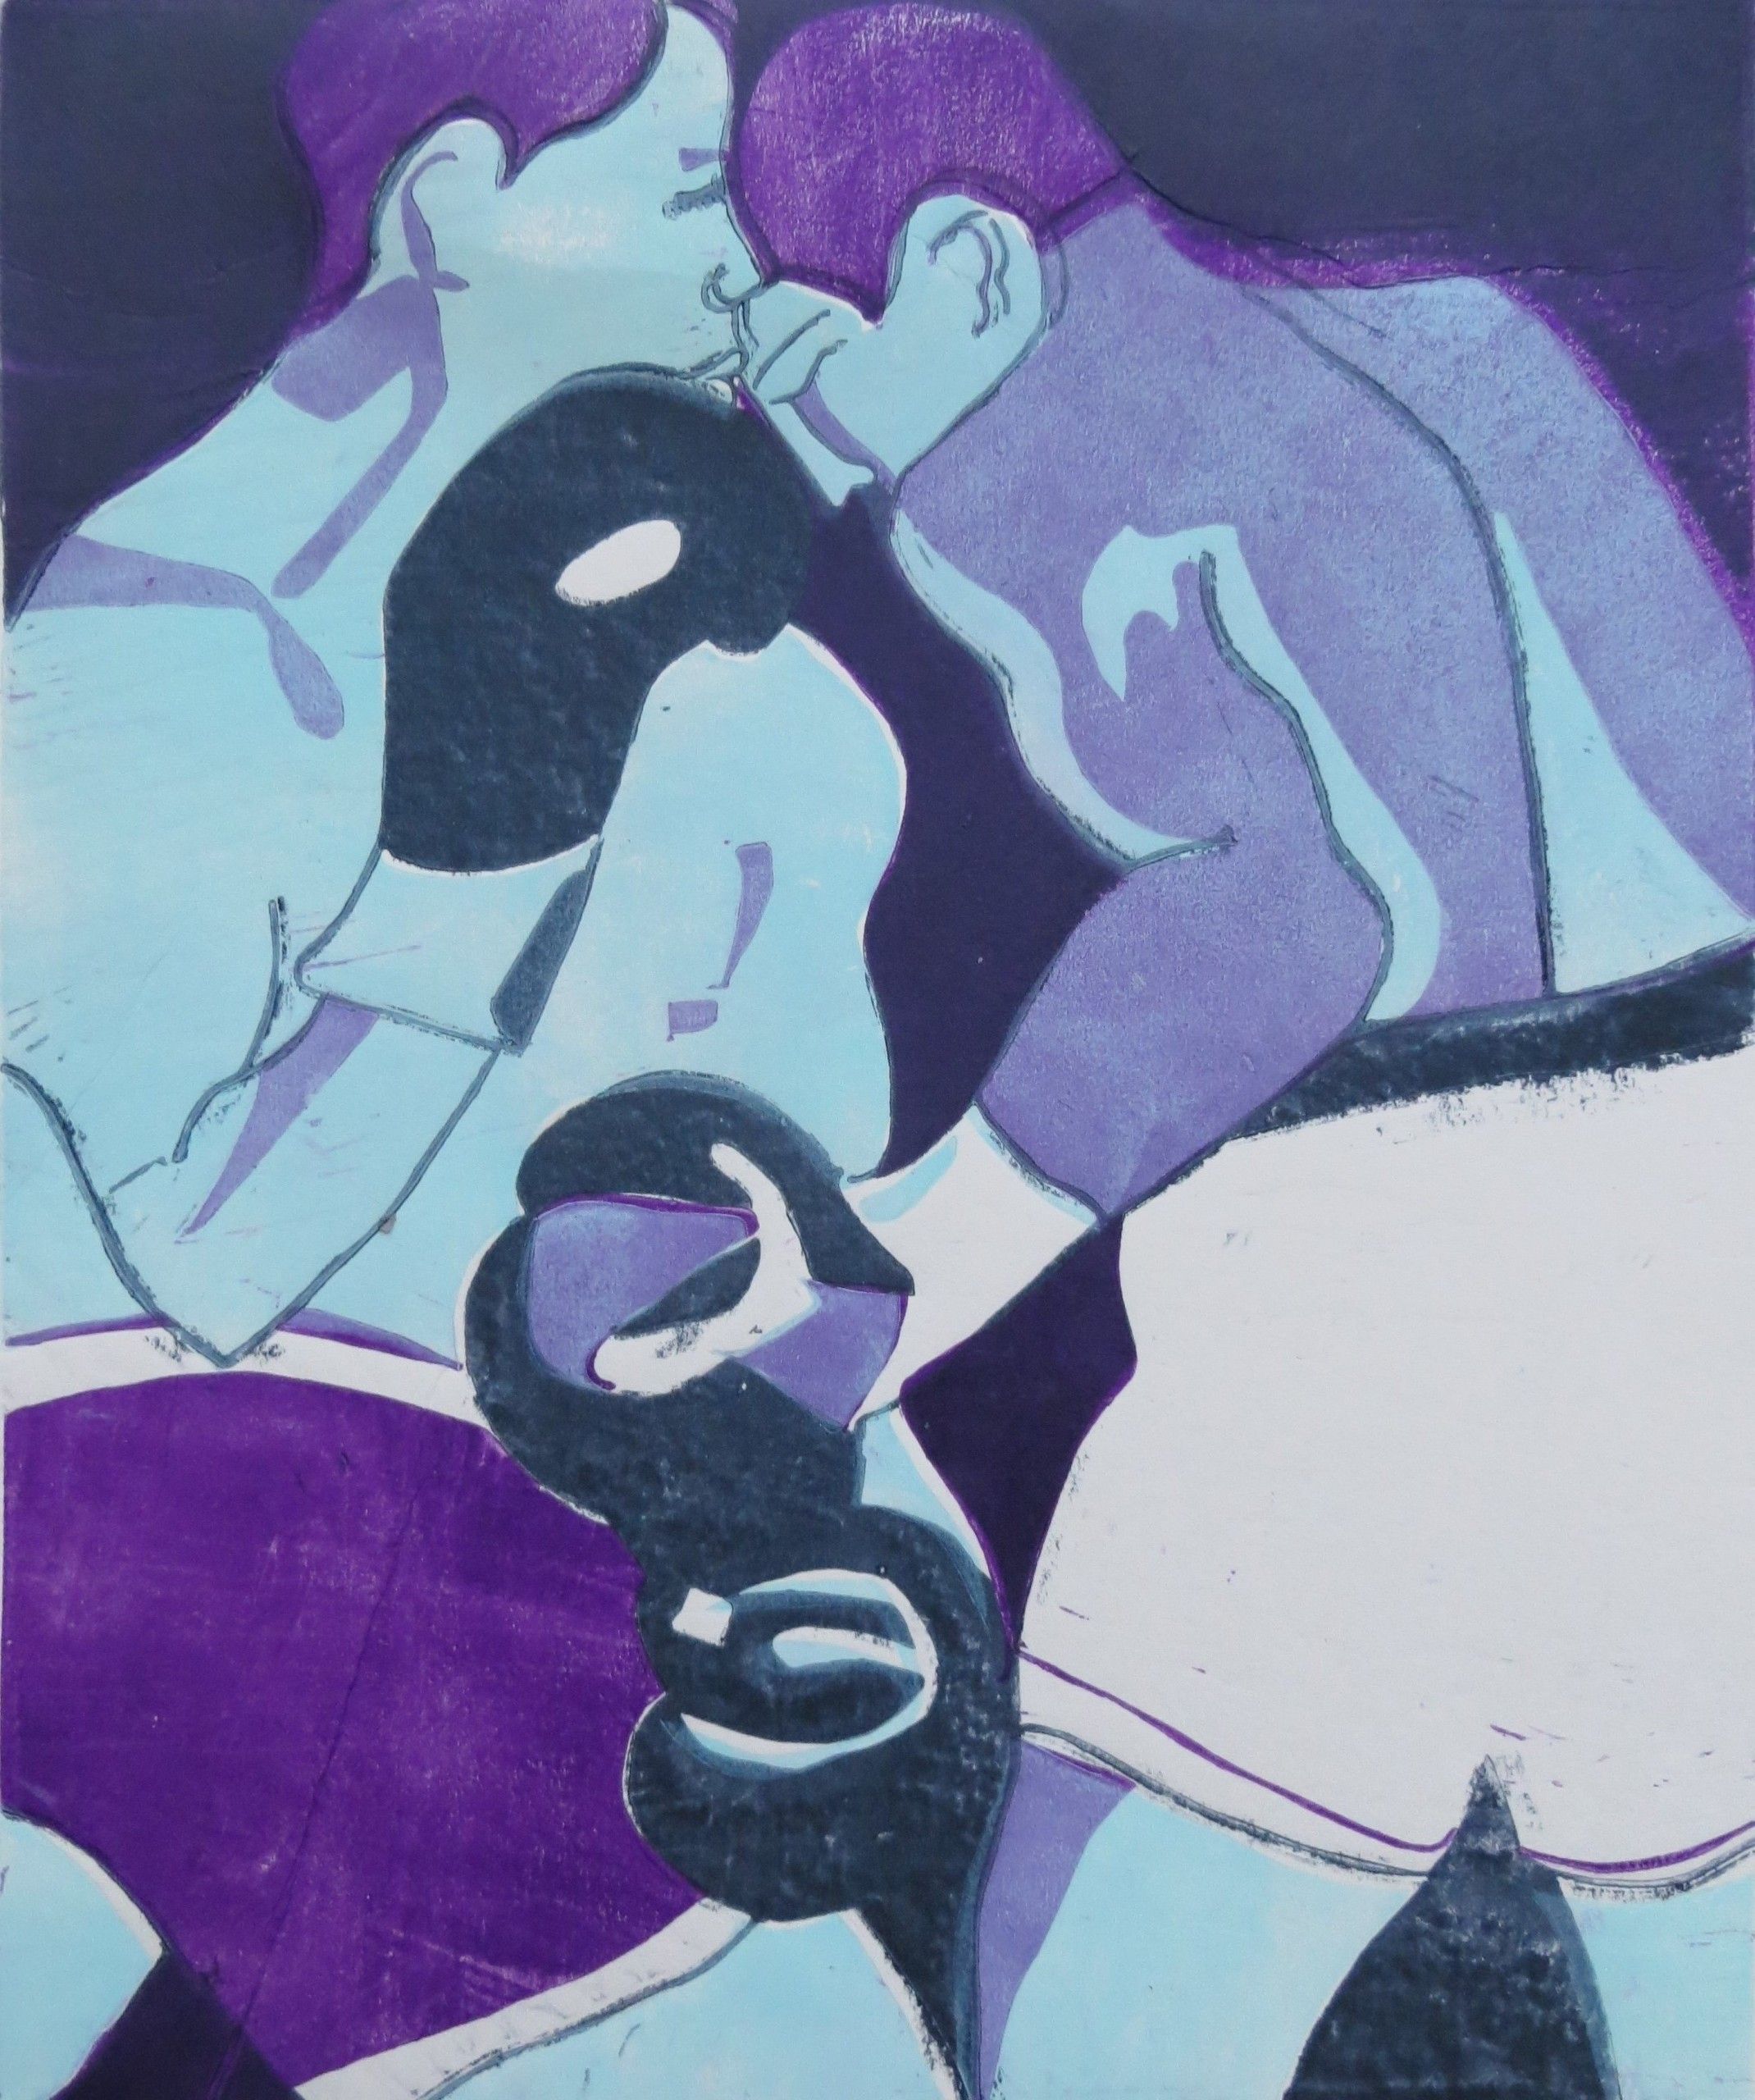 In The Ring (Violet) by Lisa Takahashi